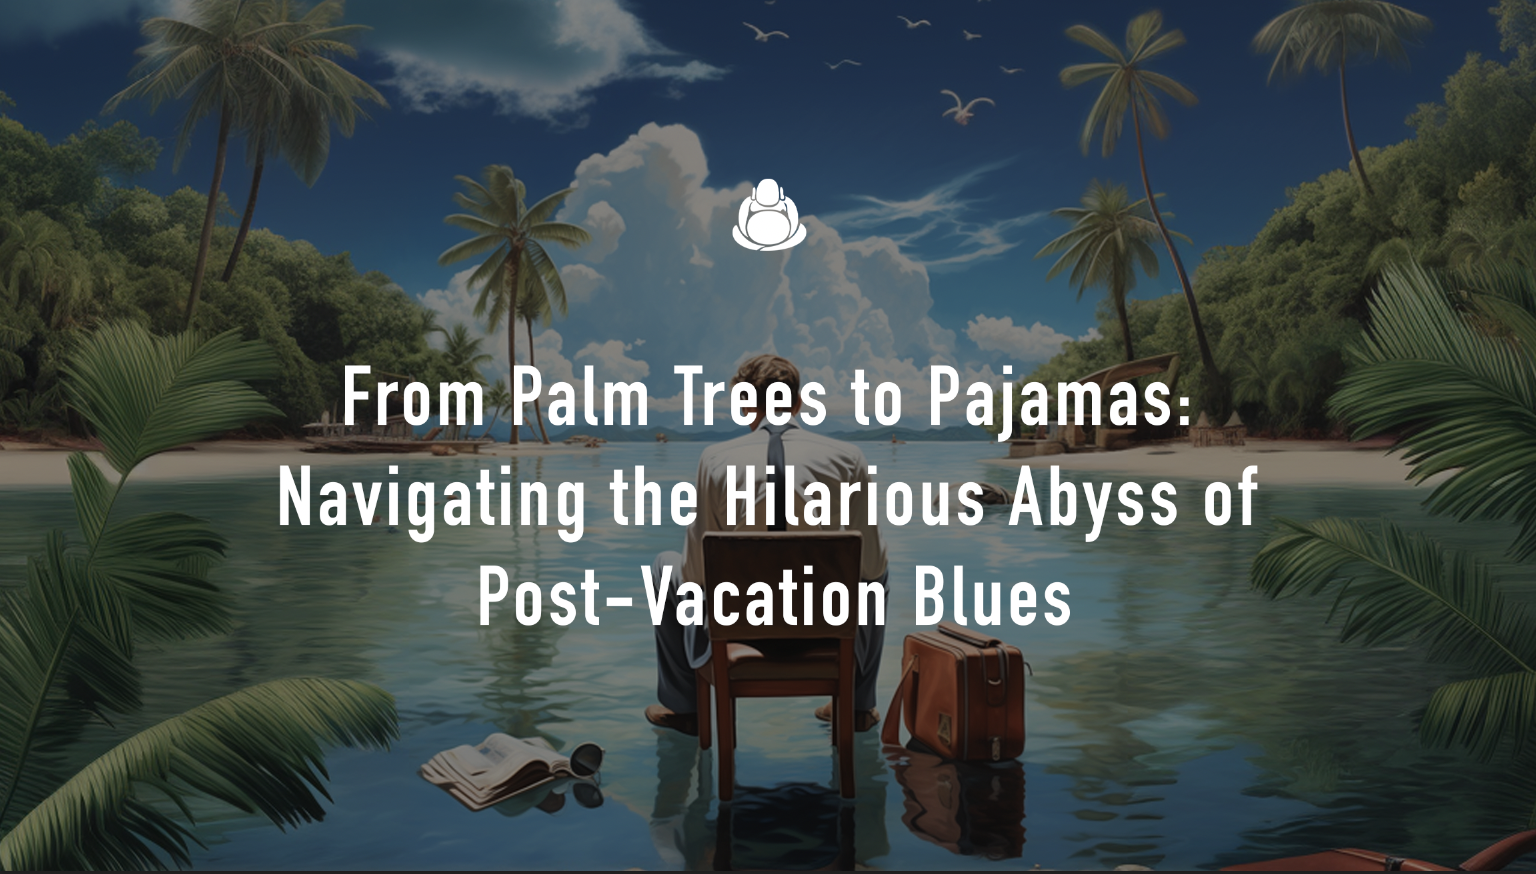 From Palm Trees to Pajamas: Navigating the Hilarious Abyss of Post-Vacation Blues